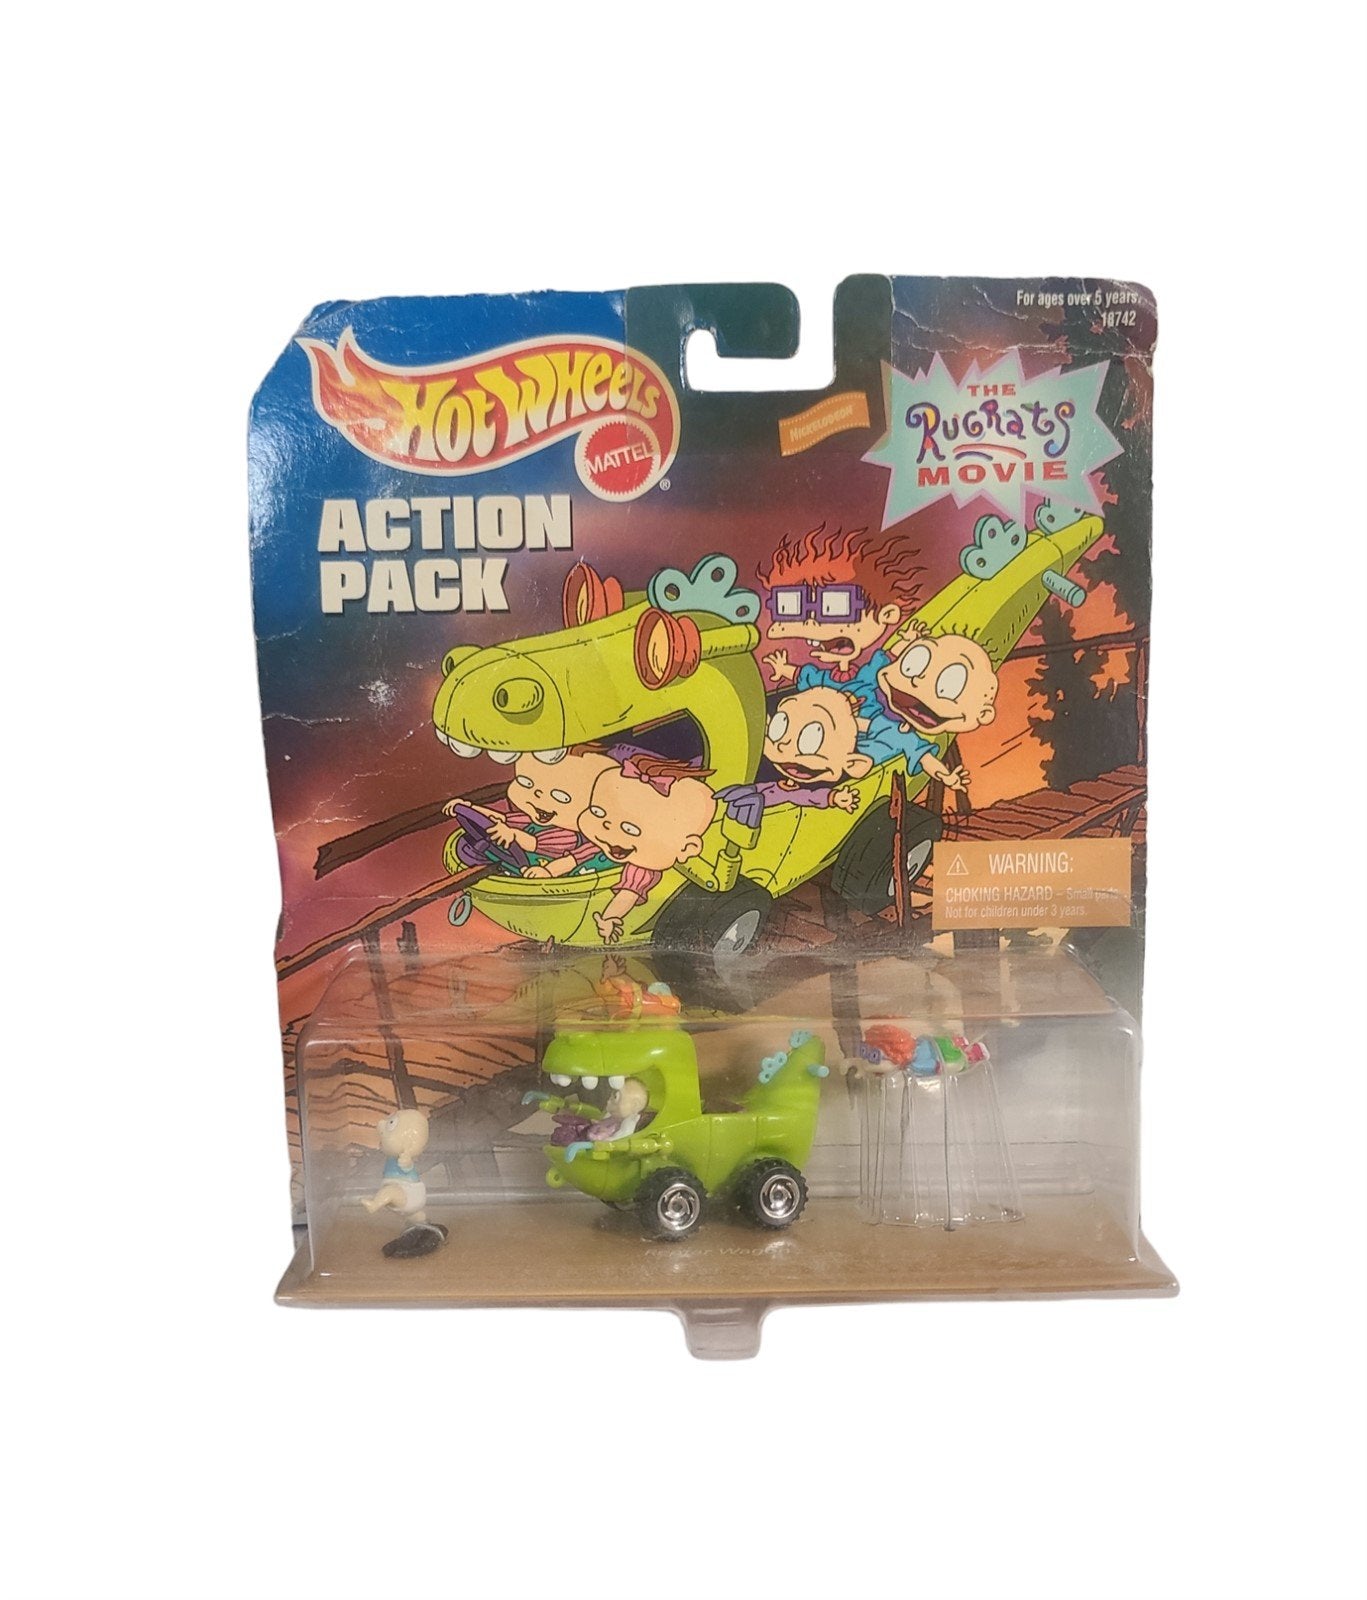 Hot Wheels Rugrats Movie Action Pack Brand New Unopened Collectible Vintage 1998